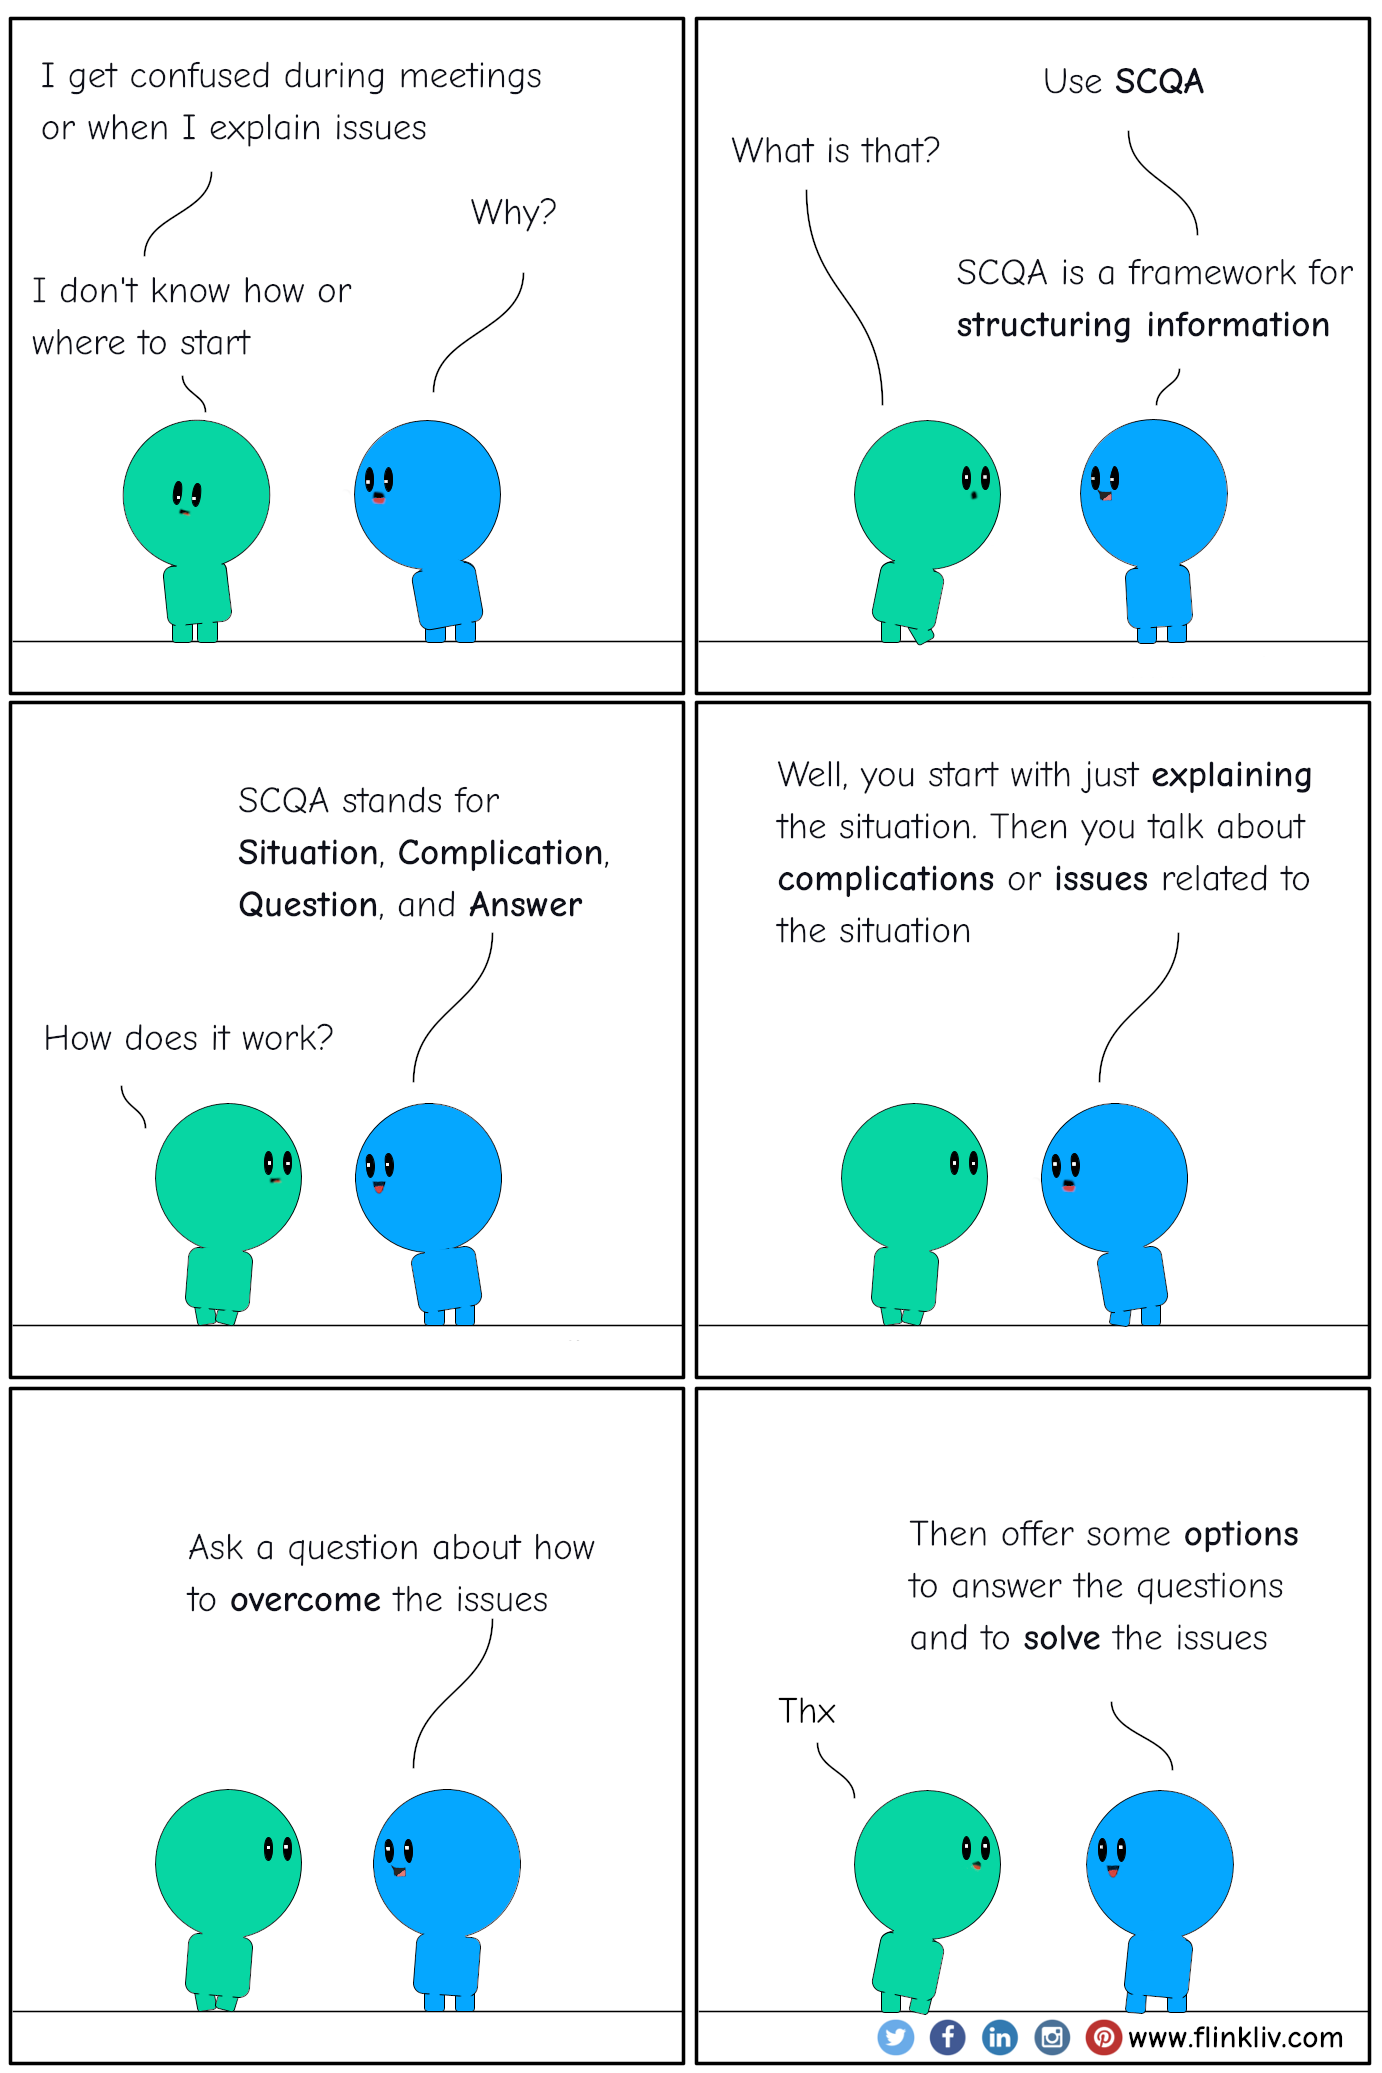 Conversation between A and B about SCQA.
              A: I get confused during meetings or when I explain issues
B: Why?
A: I don't know how or where to start
B: You can use SCQA
A: What is that?
B: SCQA is a framework for structuring information
B: SCQA stands for Situation, Complication, Question, and Answer
A: How does it work?
B: Well, you start with just explaining the situation. Then you talk about complications or issues related to the situation
B: Ask a question about how to overcome the issues
B: Then offer some options to answer the questions and to solve the issues
A: Waw, thx

              